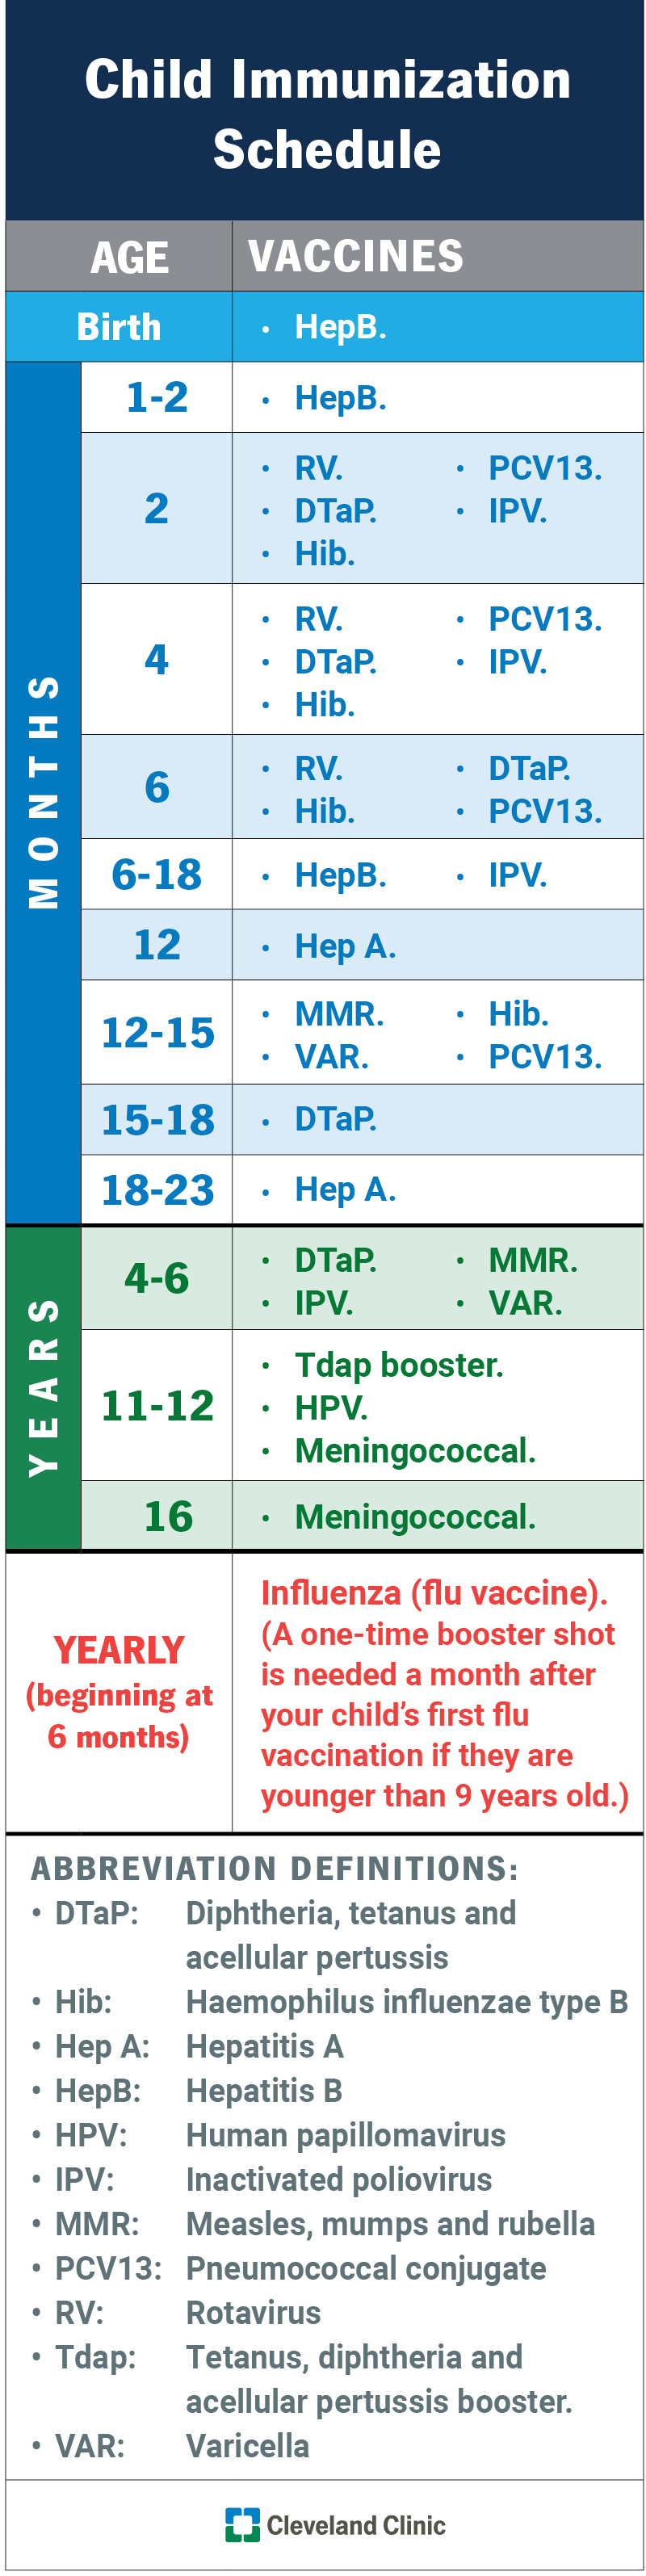 The CDC’s recommended childhood immunization schedule.